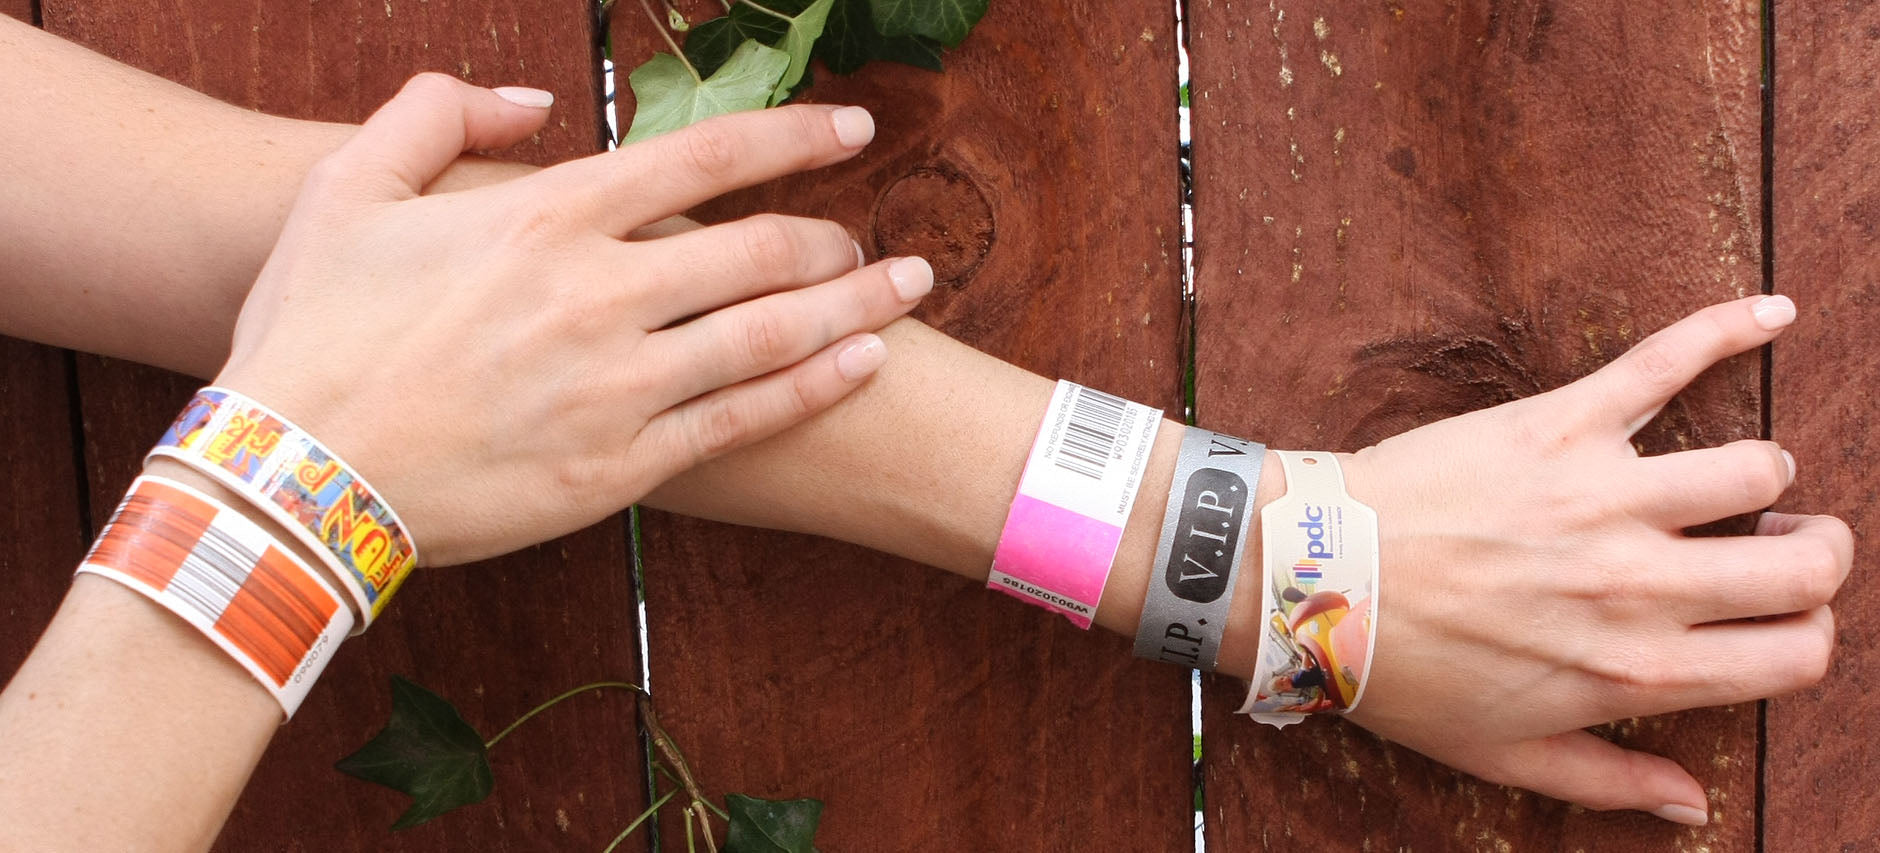 How to Get the Most Advertising from Your Wristbands